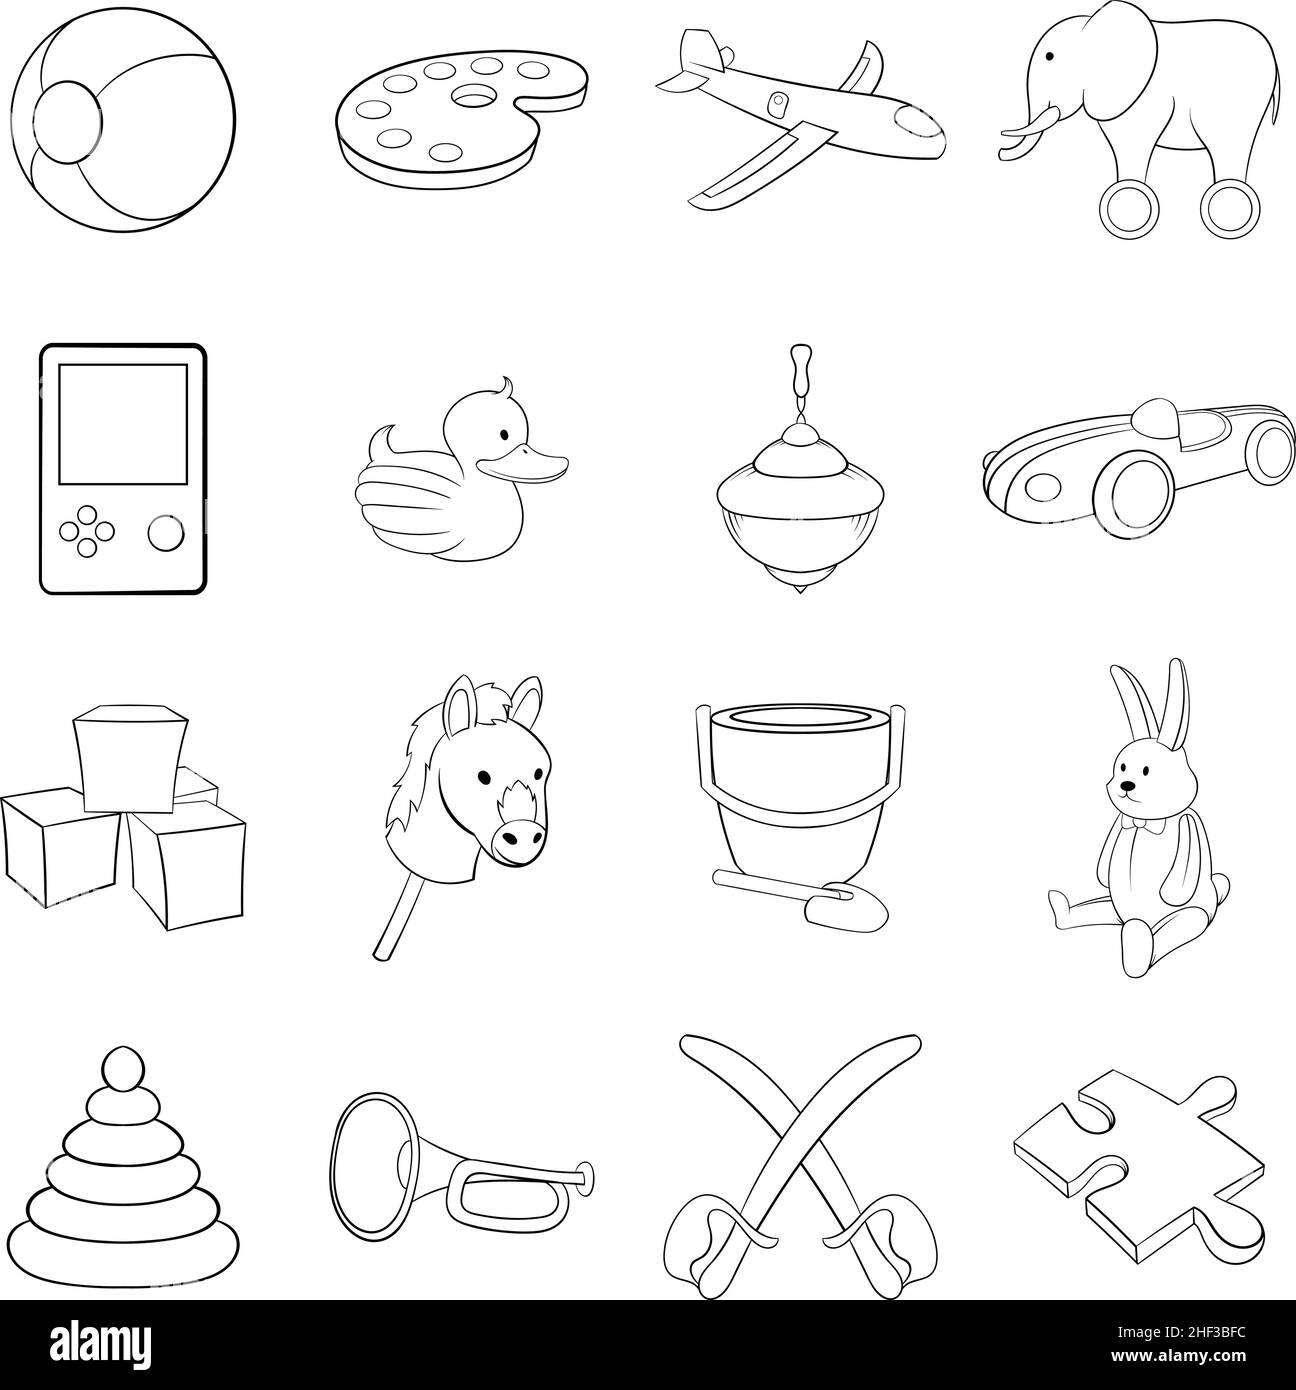 Toys icons set in outline style isolated on white background Stock Vector